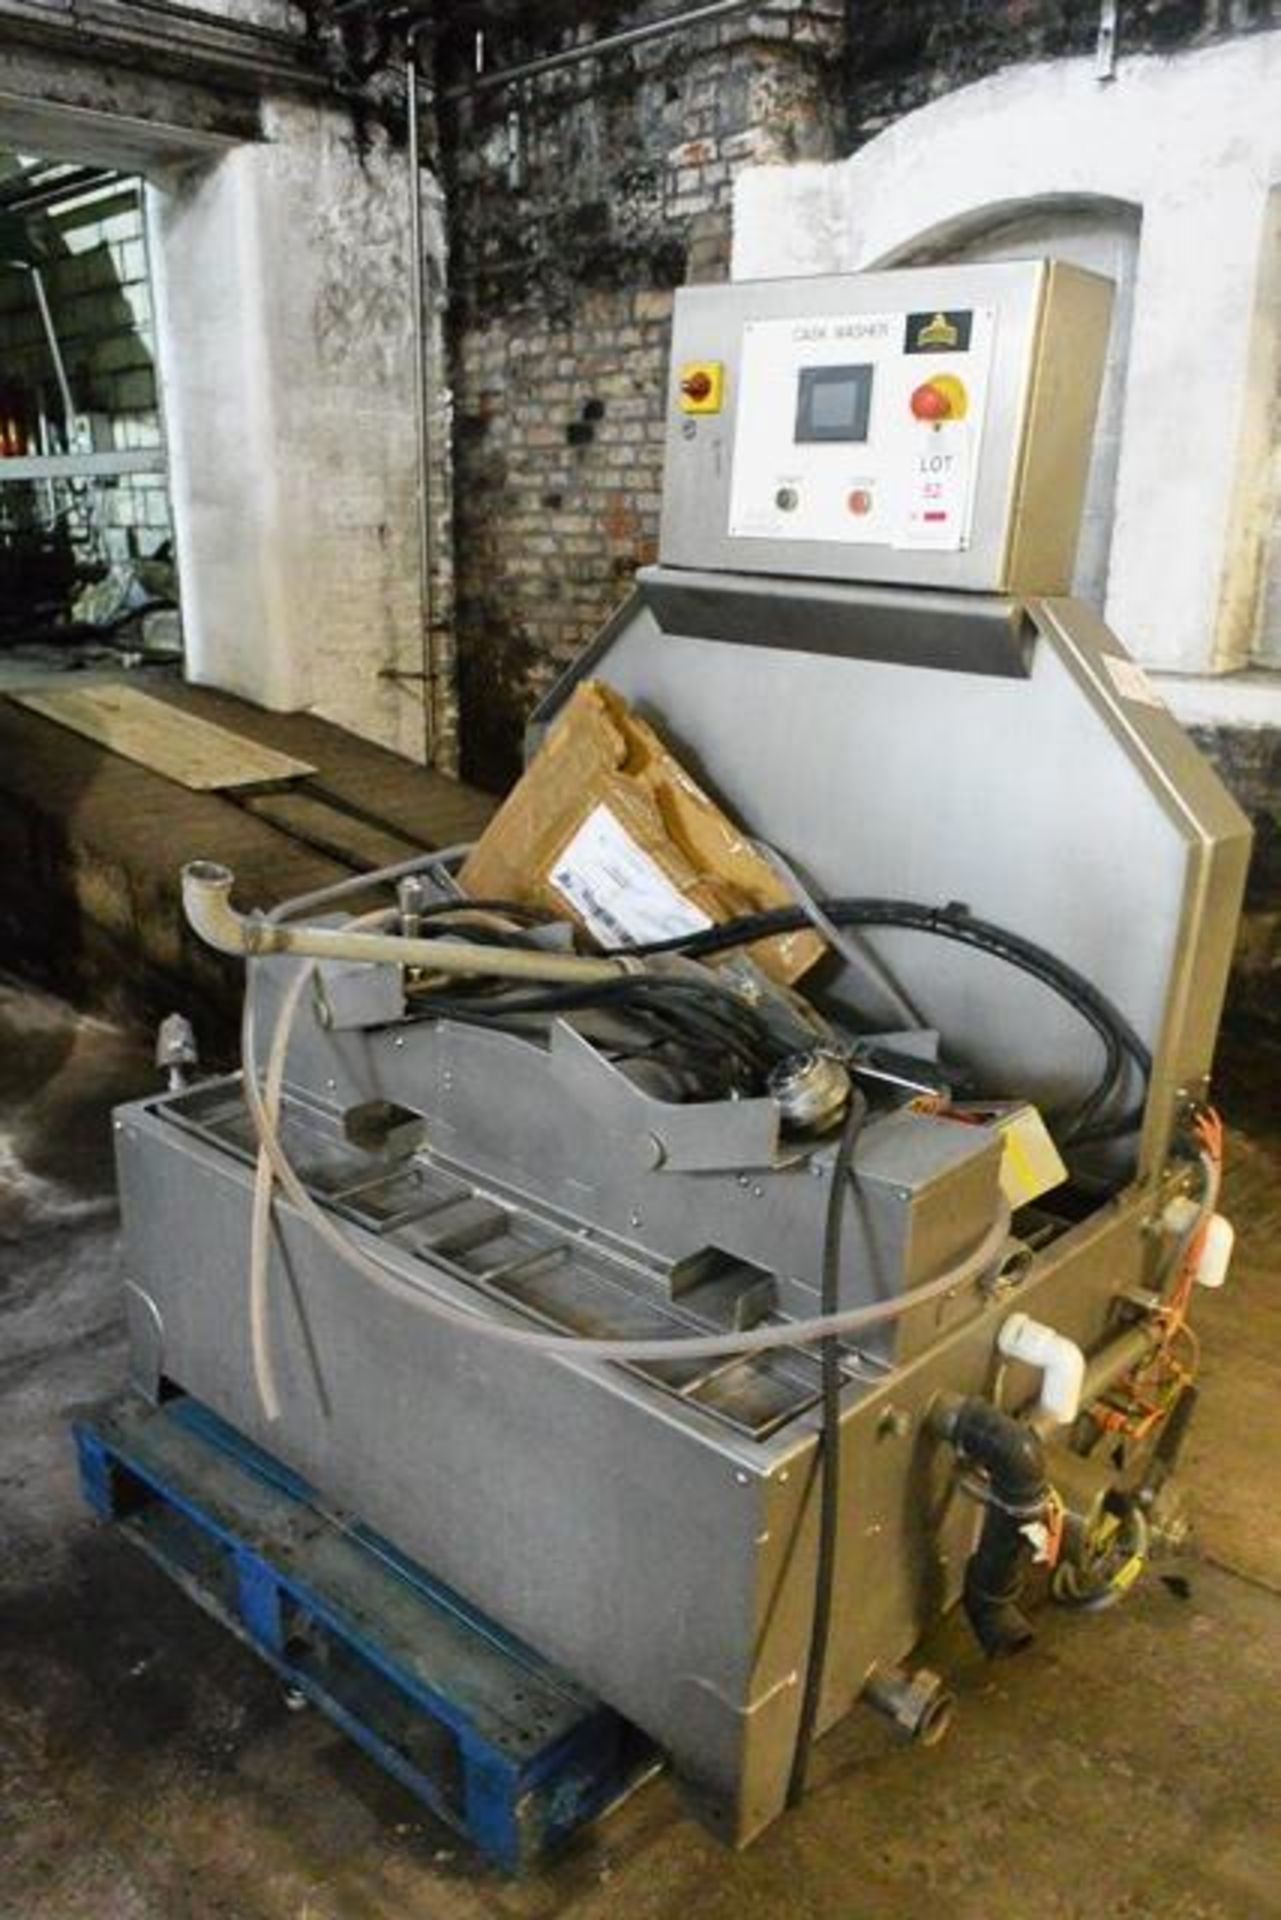 Microdat twin keg cask washer (3 phase), with associated pipework and power cable (as per lot